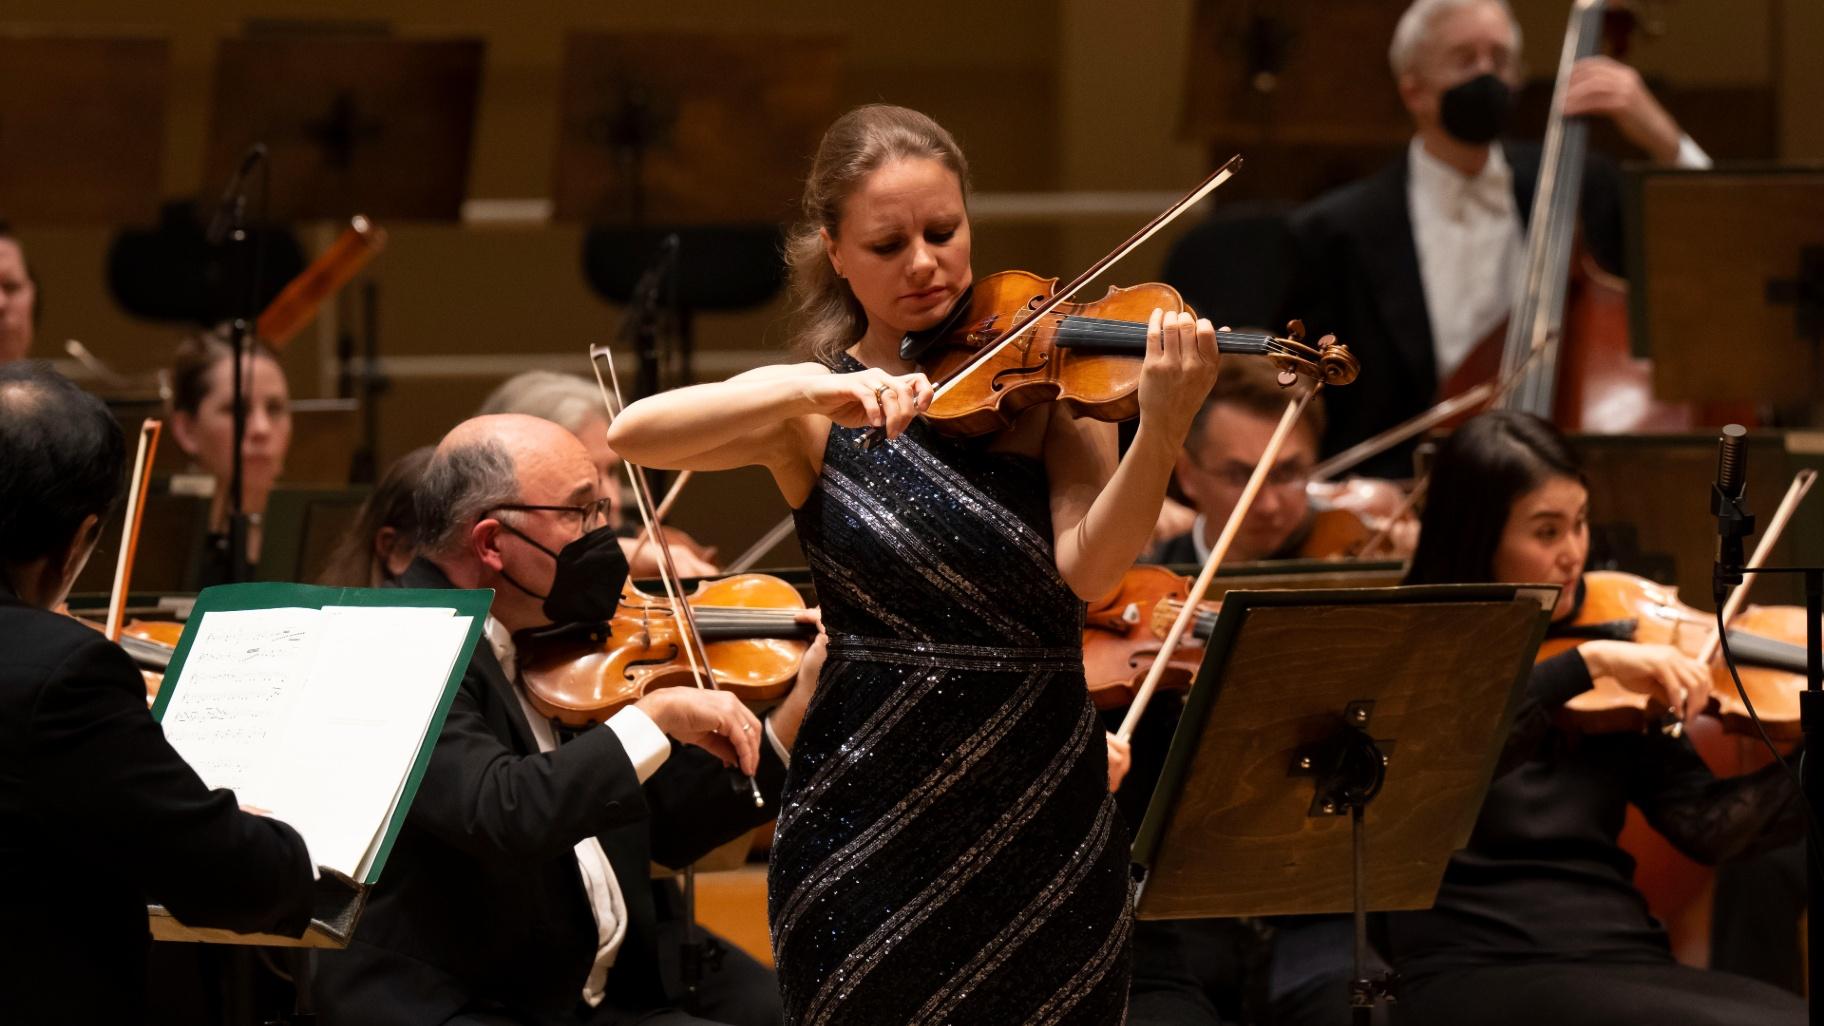 Violinist Julia Fischer joined Riccardo Muti and the CSO for a performance of Schumann’s “Violin Concerto” on Feb. 23. (Todd Rosenberg)